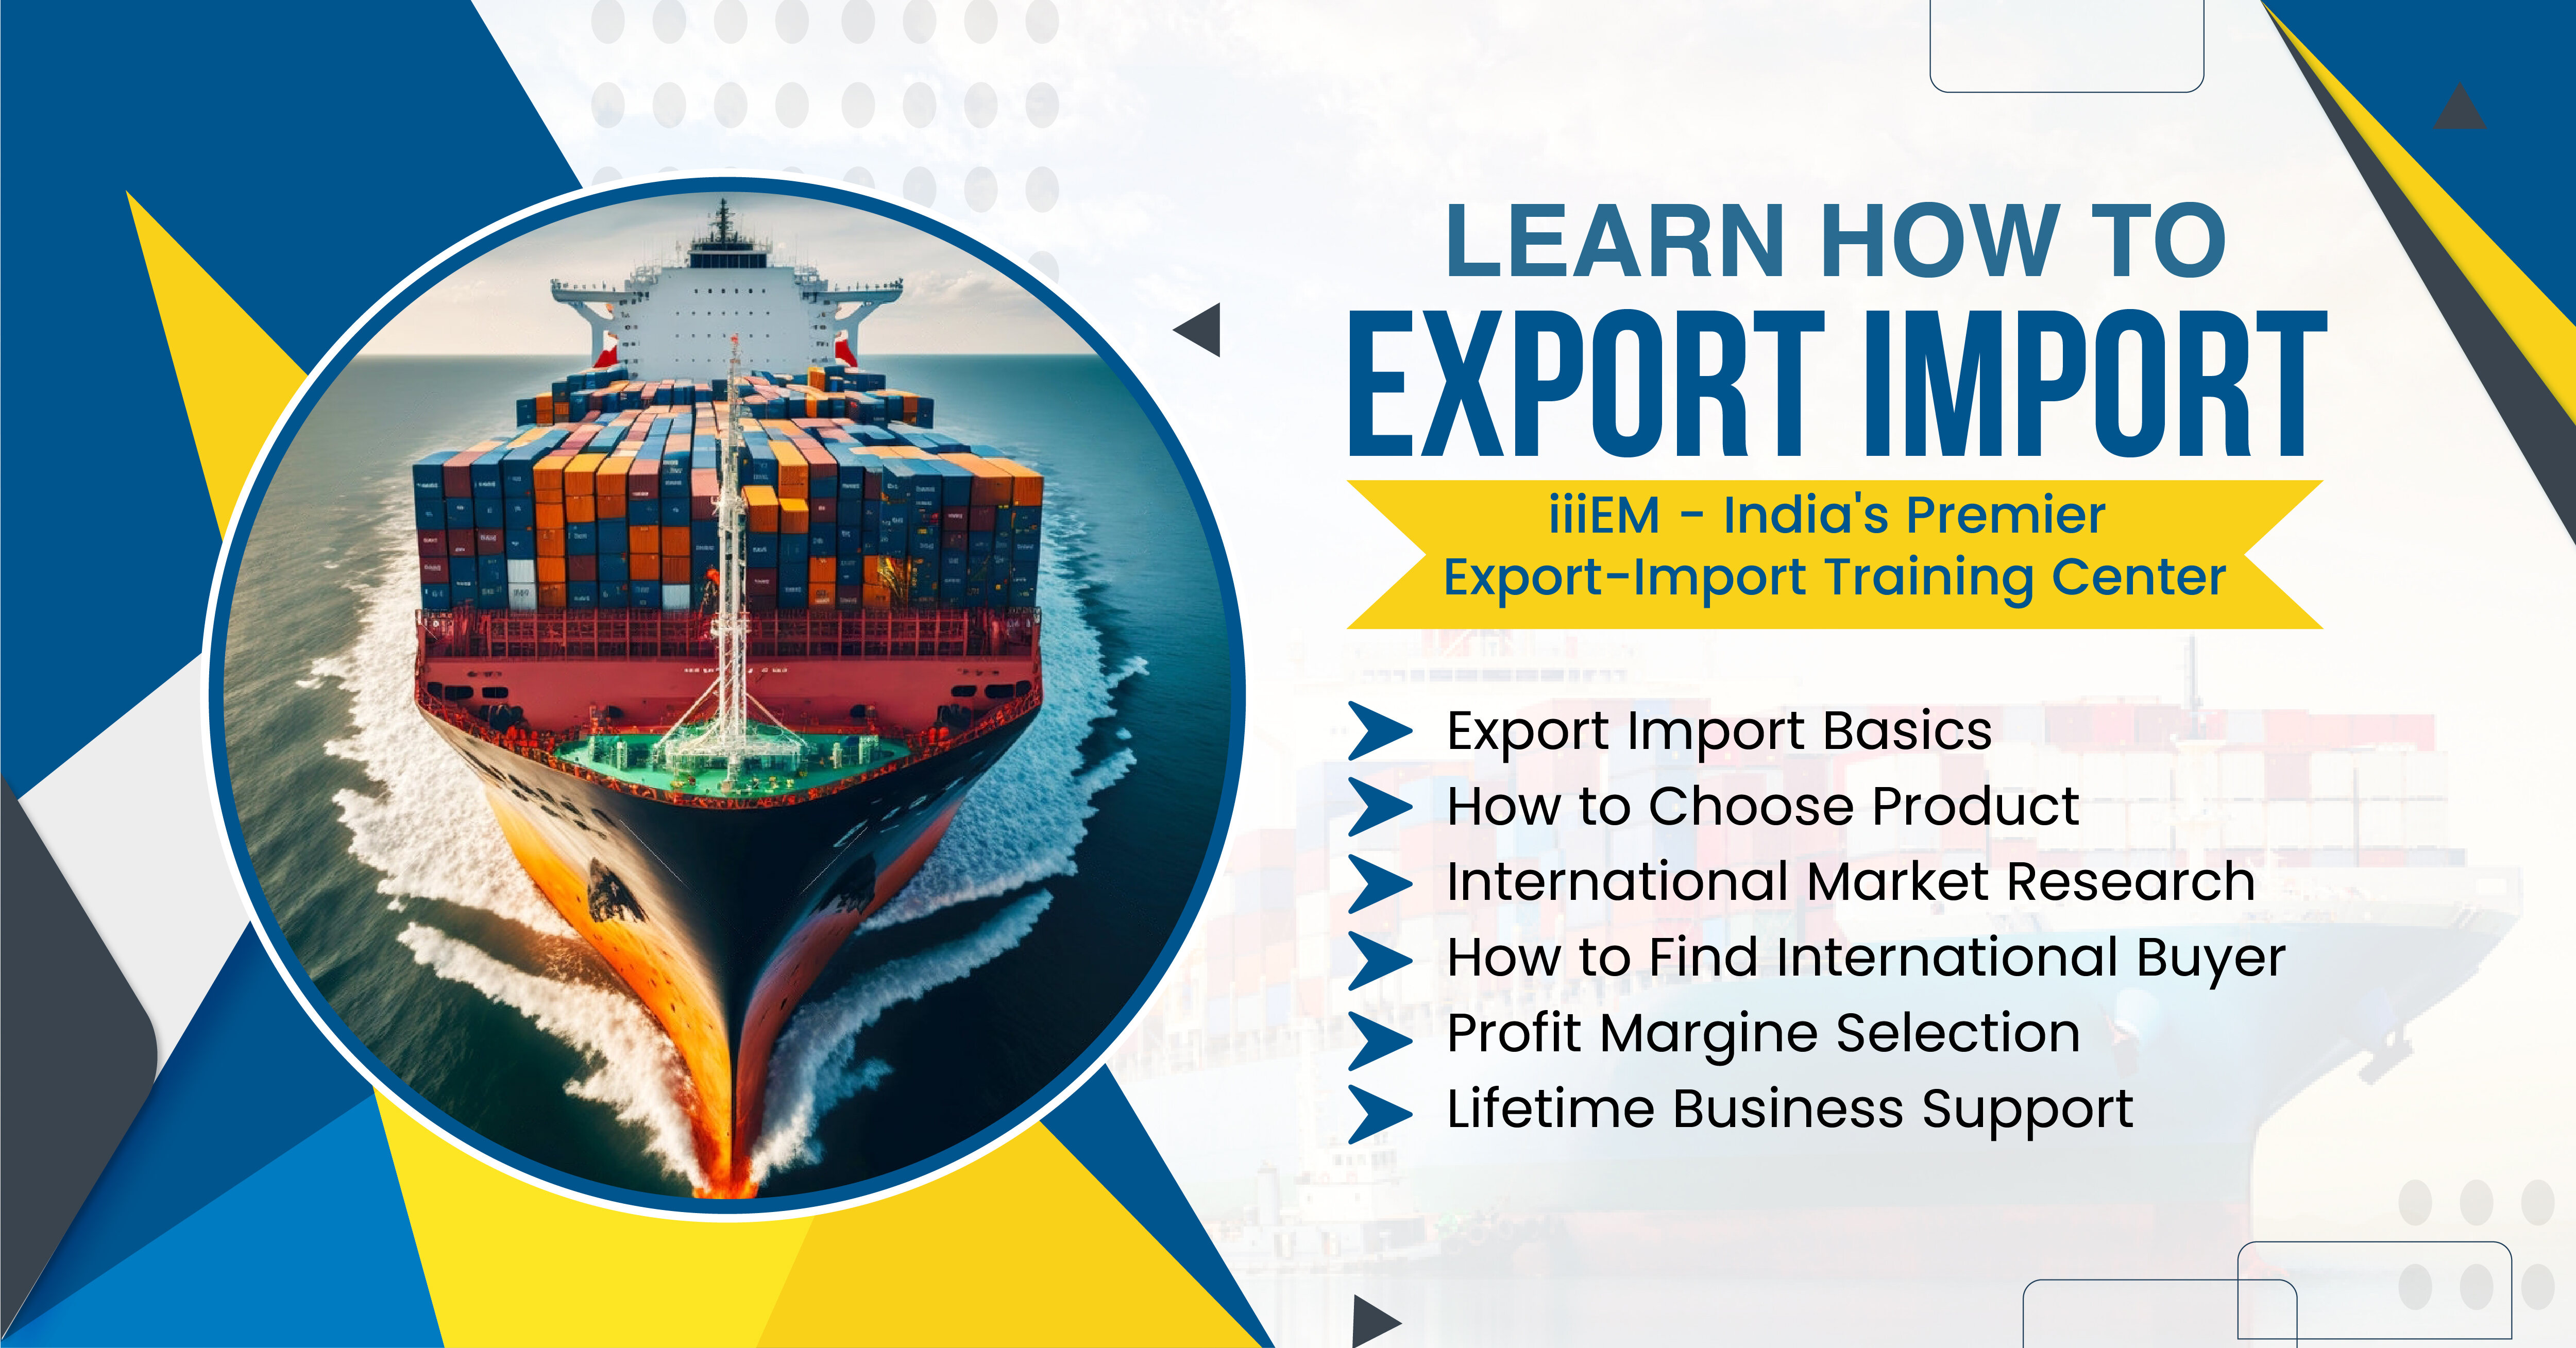 Certified Export Import Business Advance Training in Ahmedabad, Ahmedabad, Gujarat, India